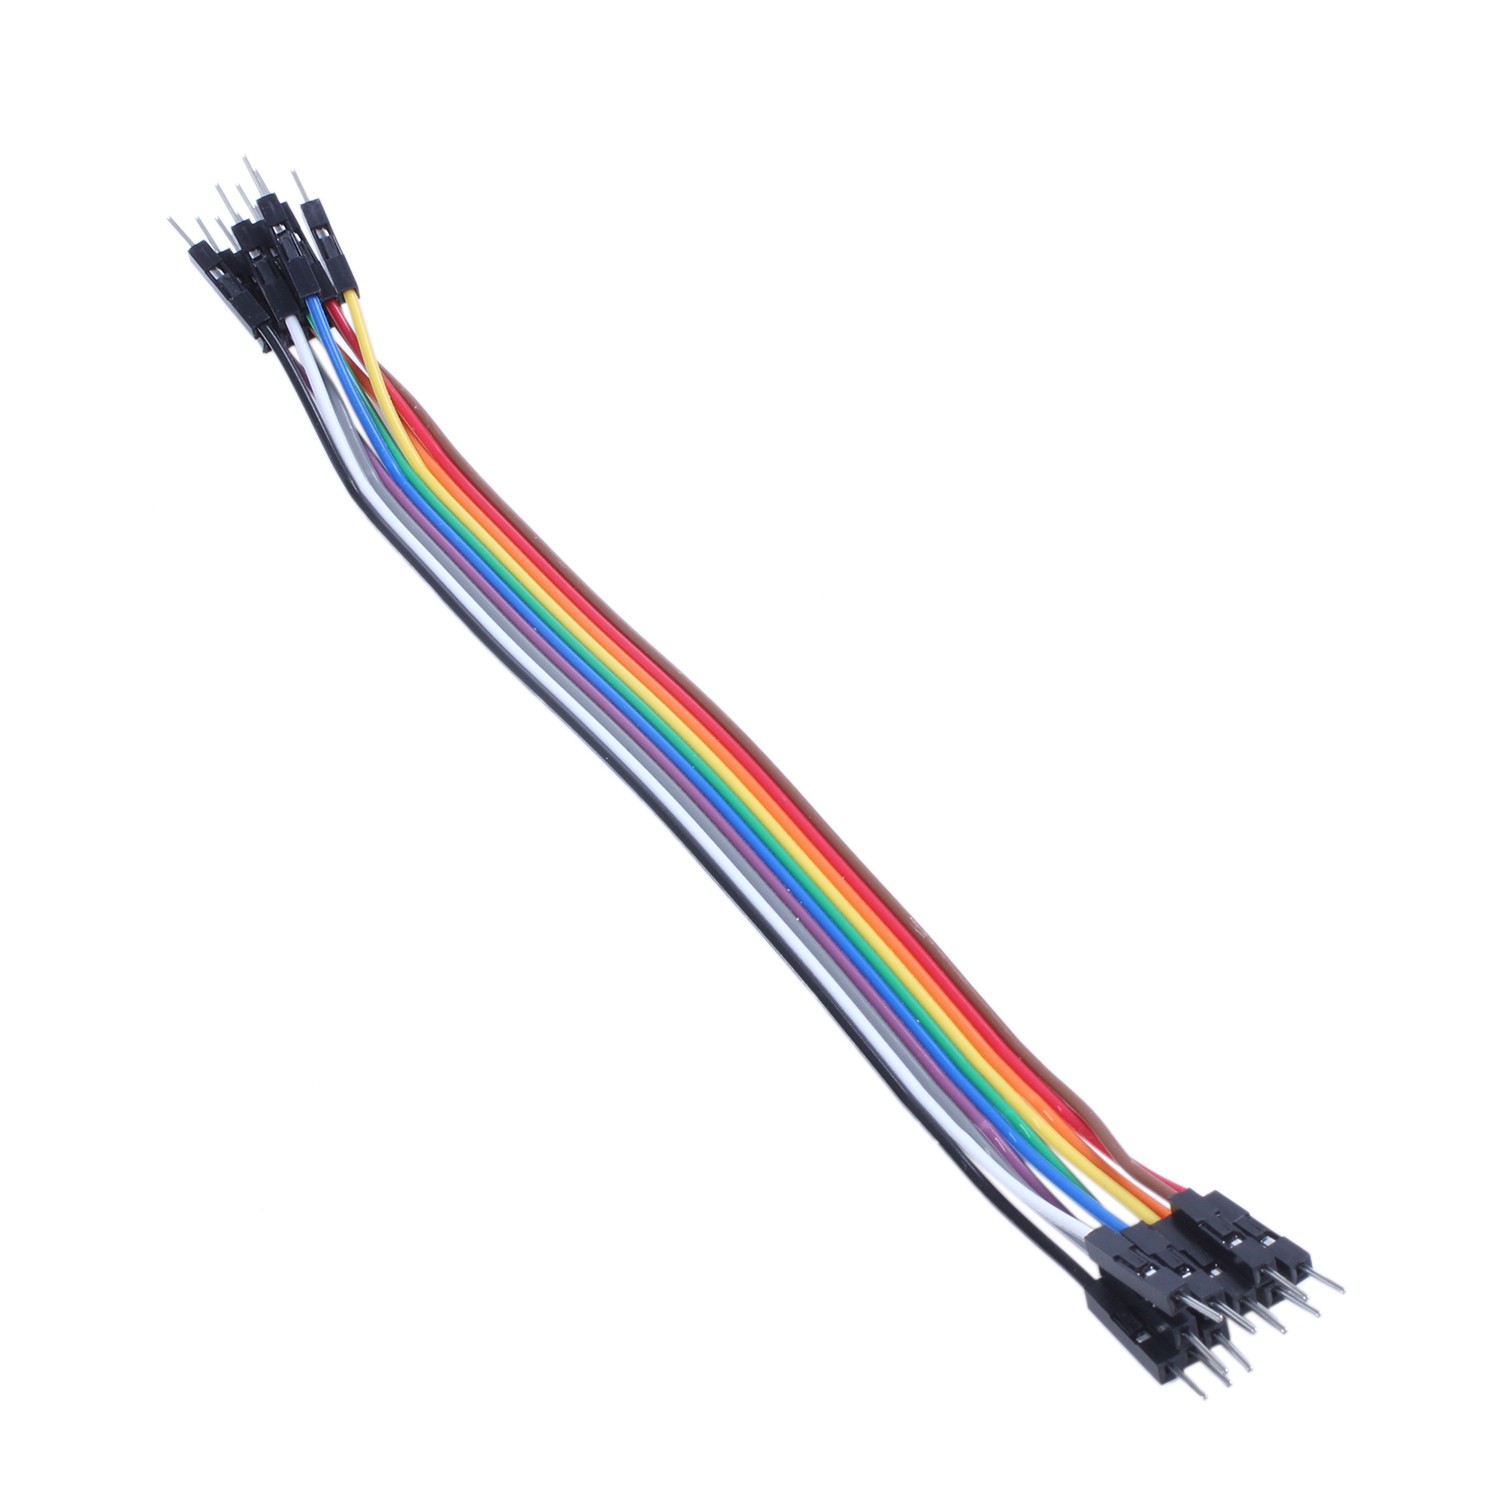 40pcs 20cm 2.54mm male to male Breadboard jumper wire cable for Arduino